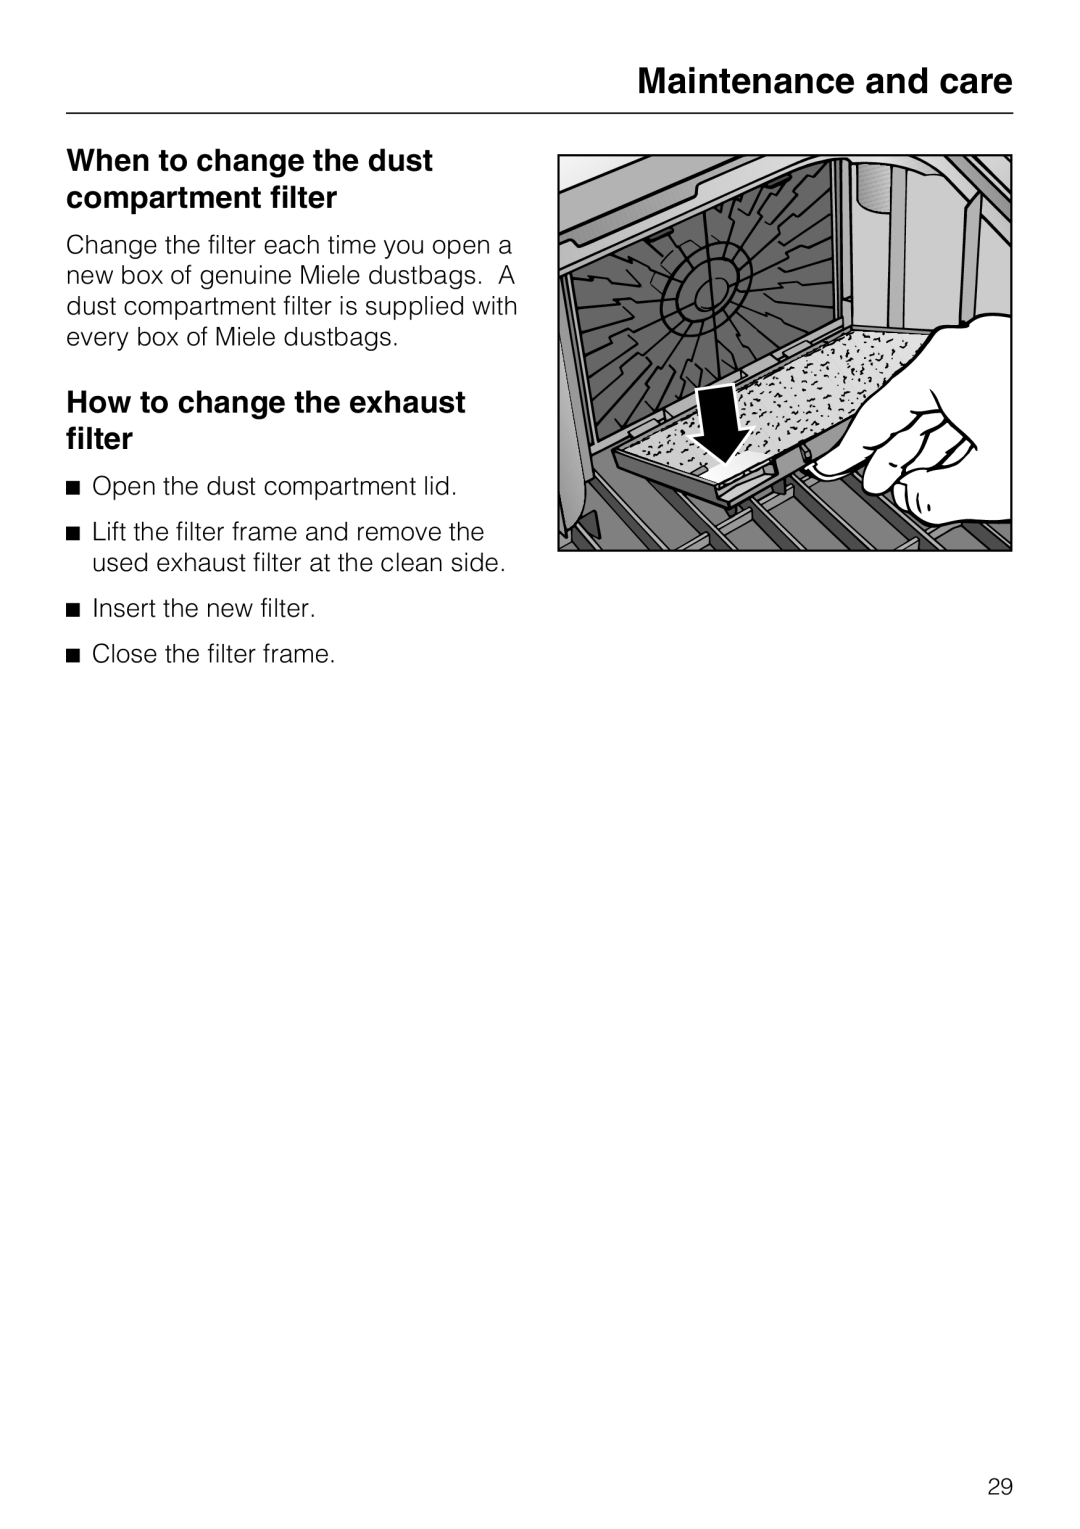 Miele S5981 When to change the dust compartment filter, How to change the exhaust filter, Maintenance and care 